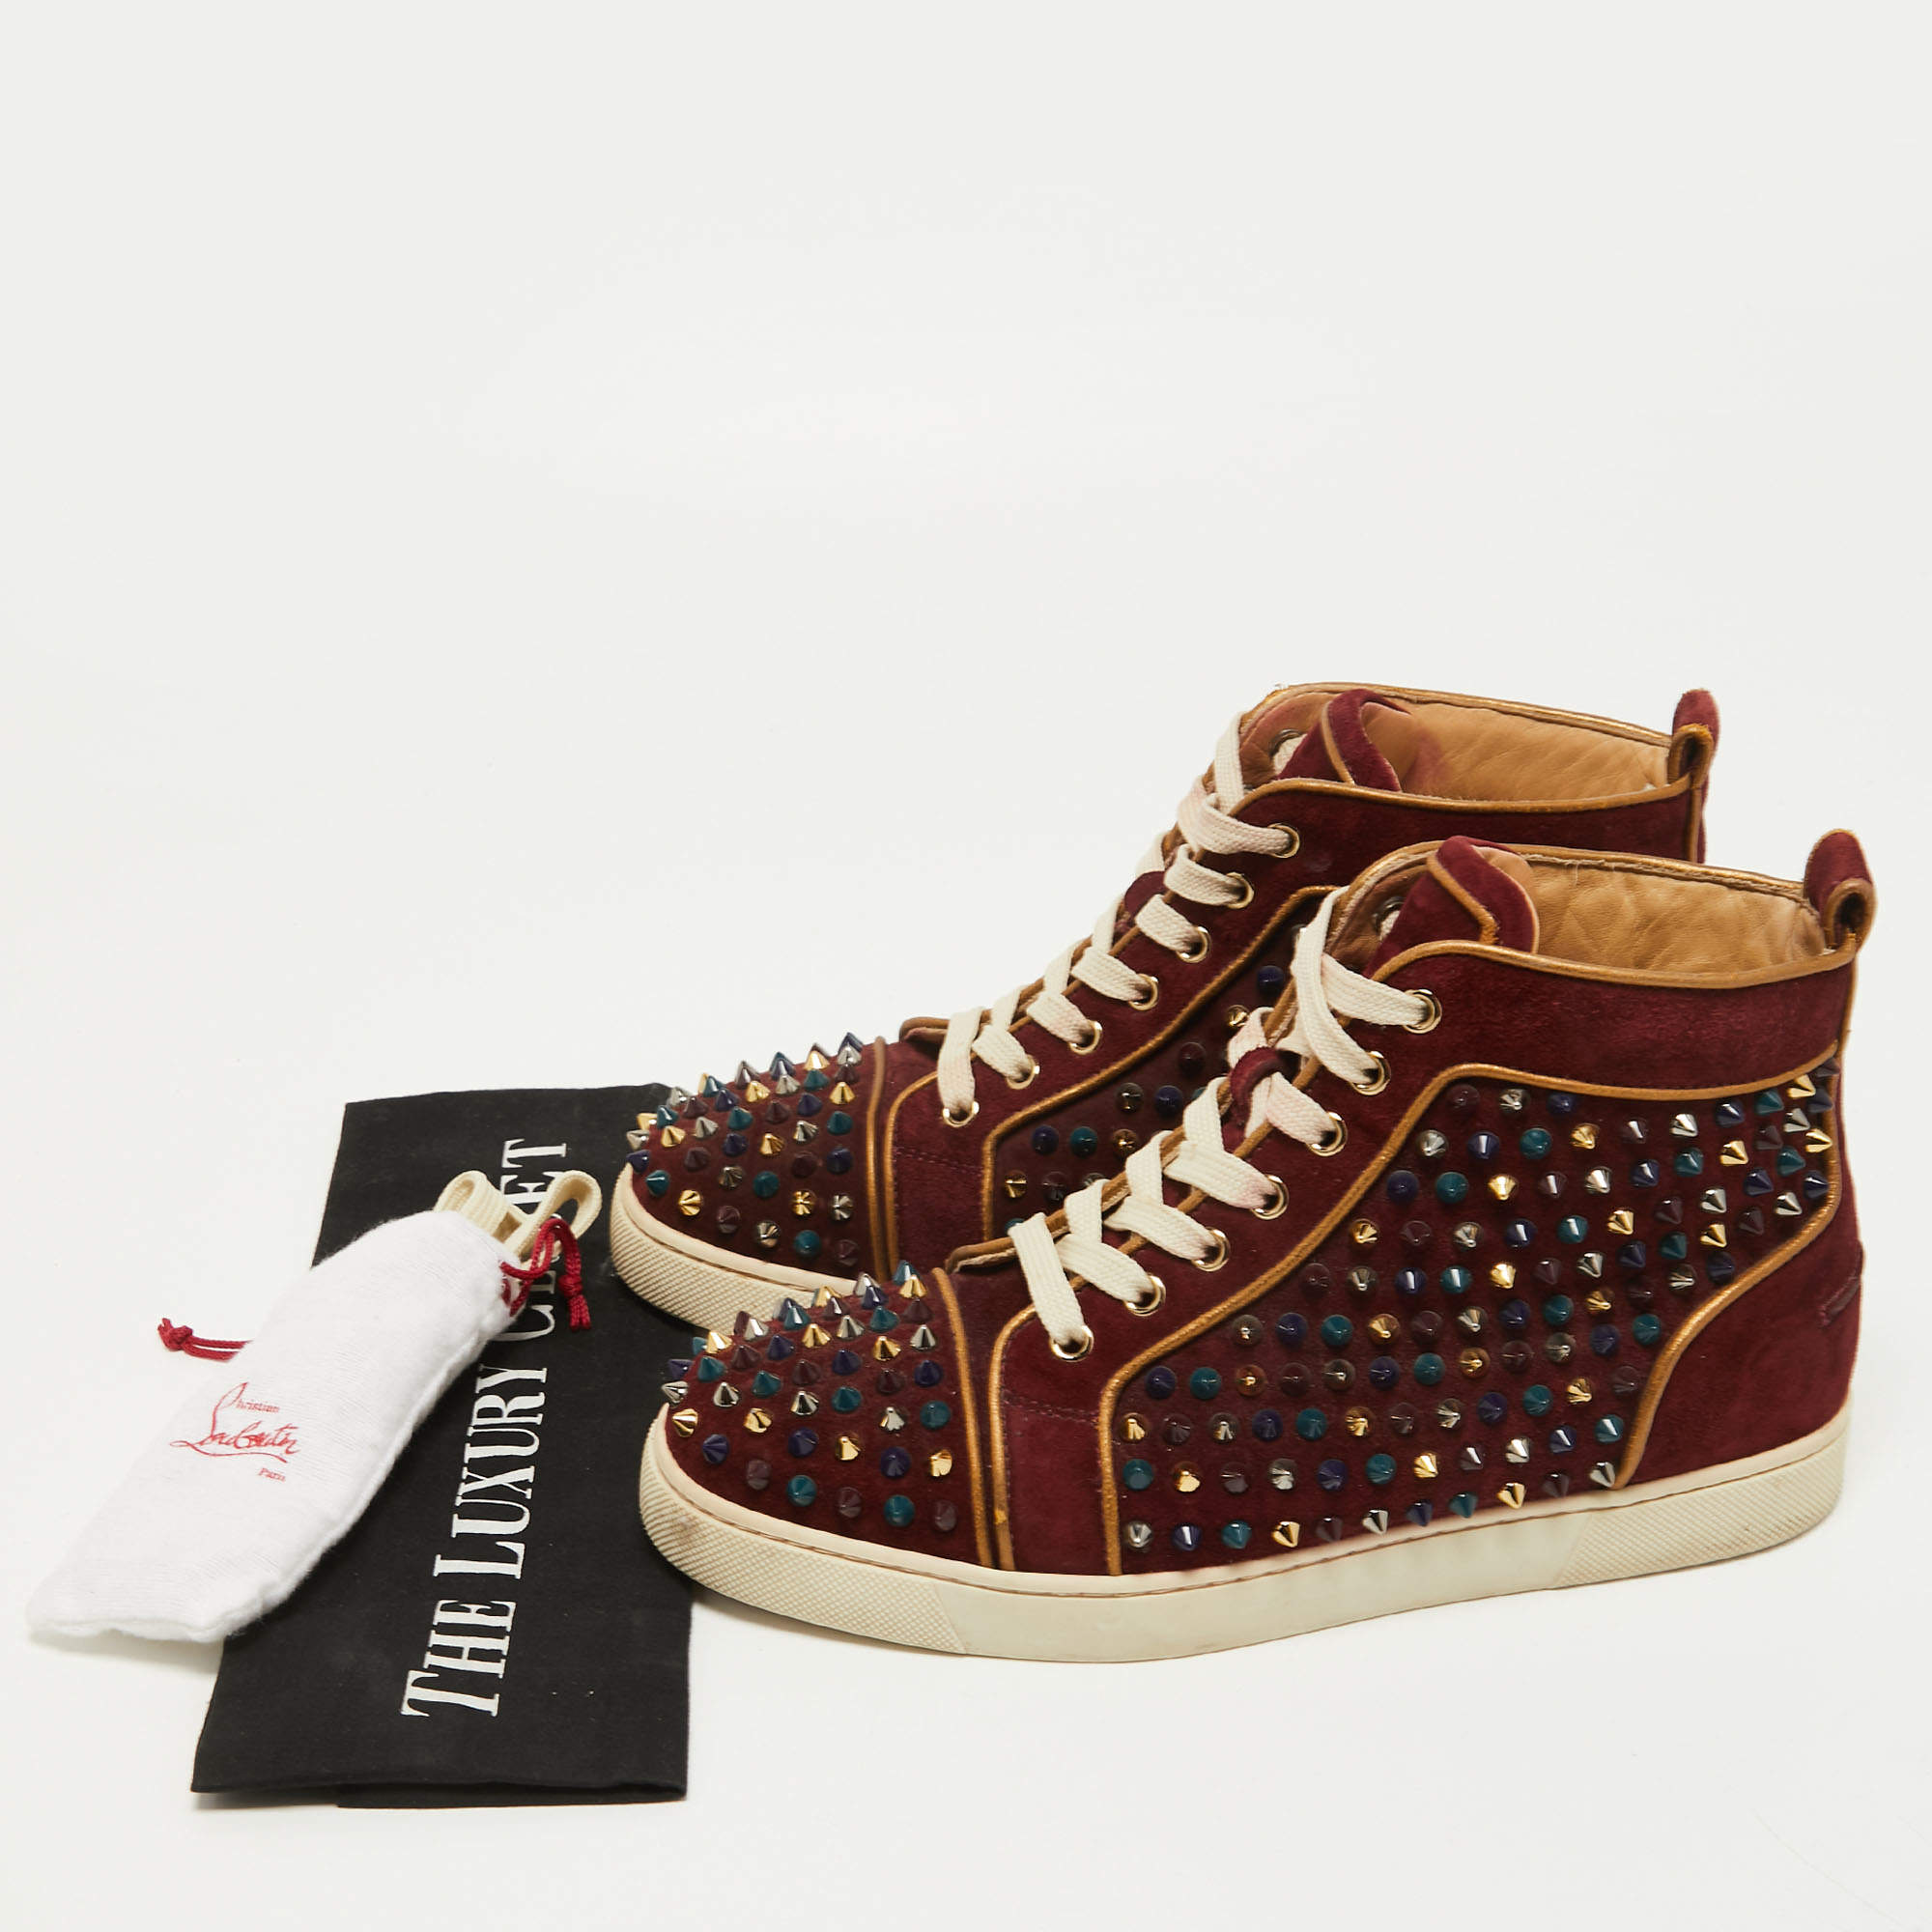 Lou spikes leather trainers Christian Louboutin Burgundy size 39 EU in  Leather - 18874948